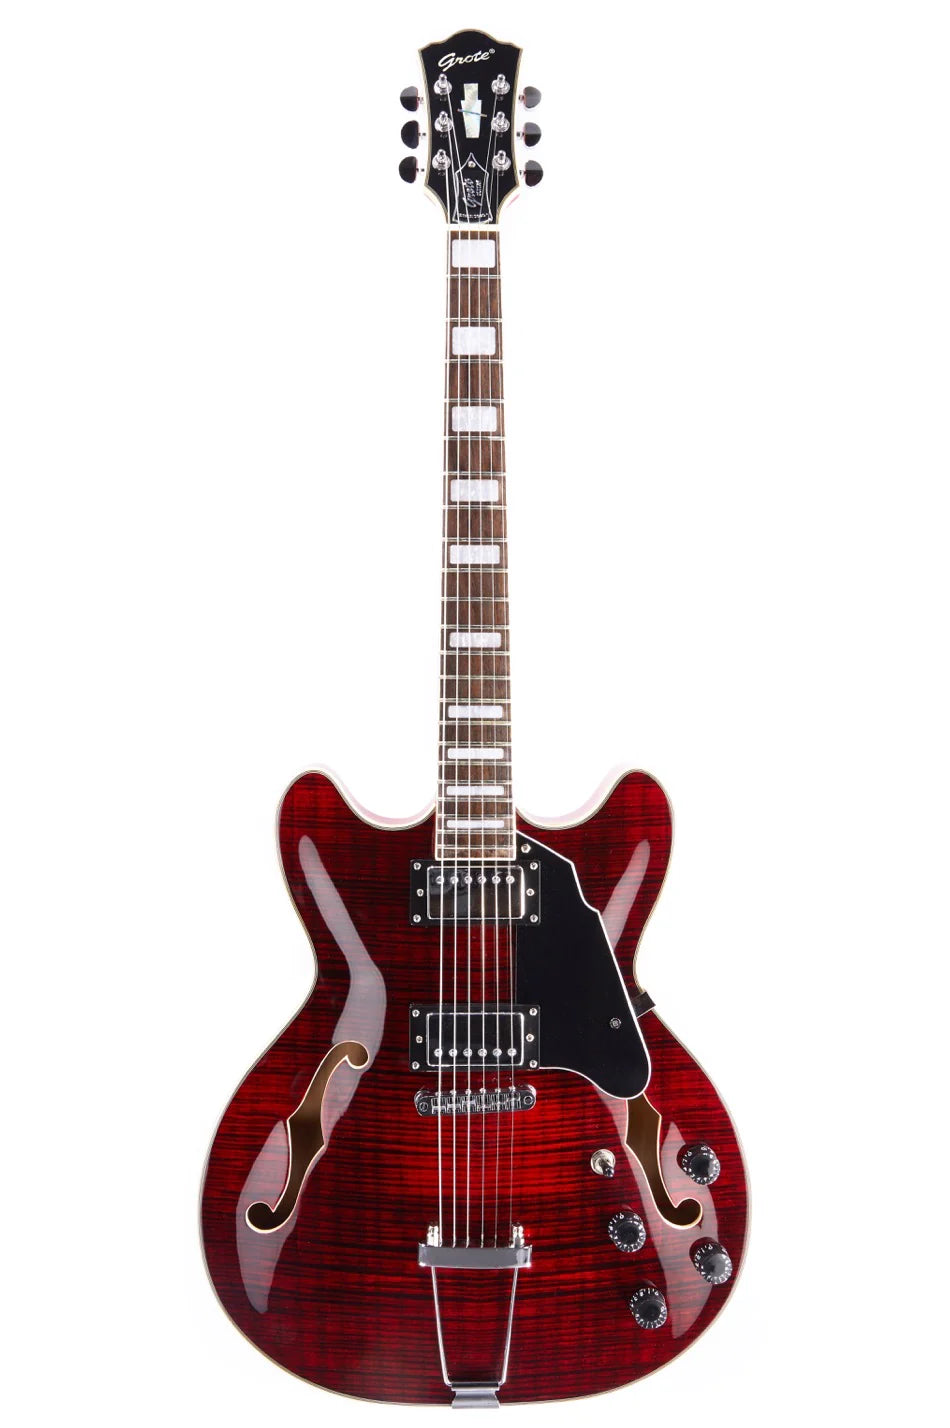 GROTE 335 STYLE SEMI-HOLLOW BODY JAZZ ELECTRIC GUITAR WITH GIGBAG